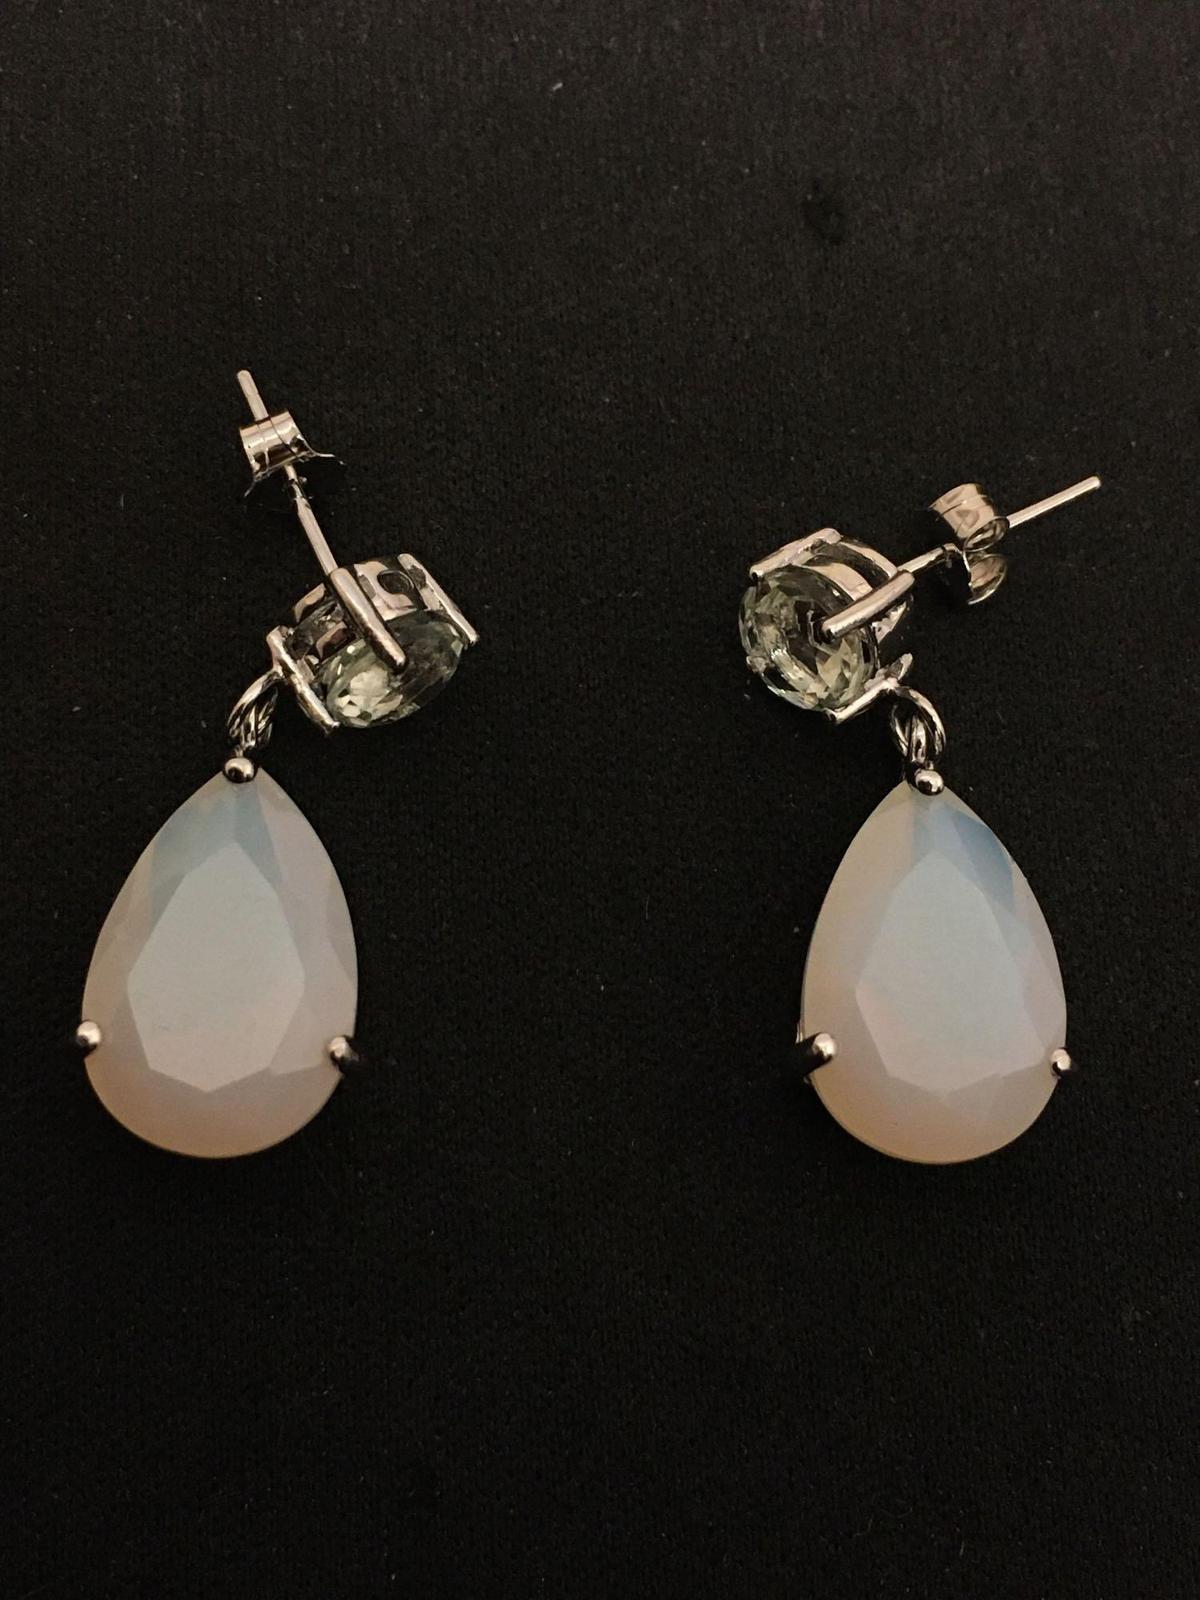 Pear Faceted 15x10mm Opalite w/ 6.0mm Round Faceted Quartz Accent Pair of Sterling Silver Drop